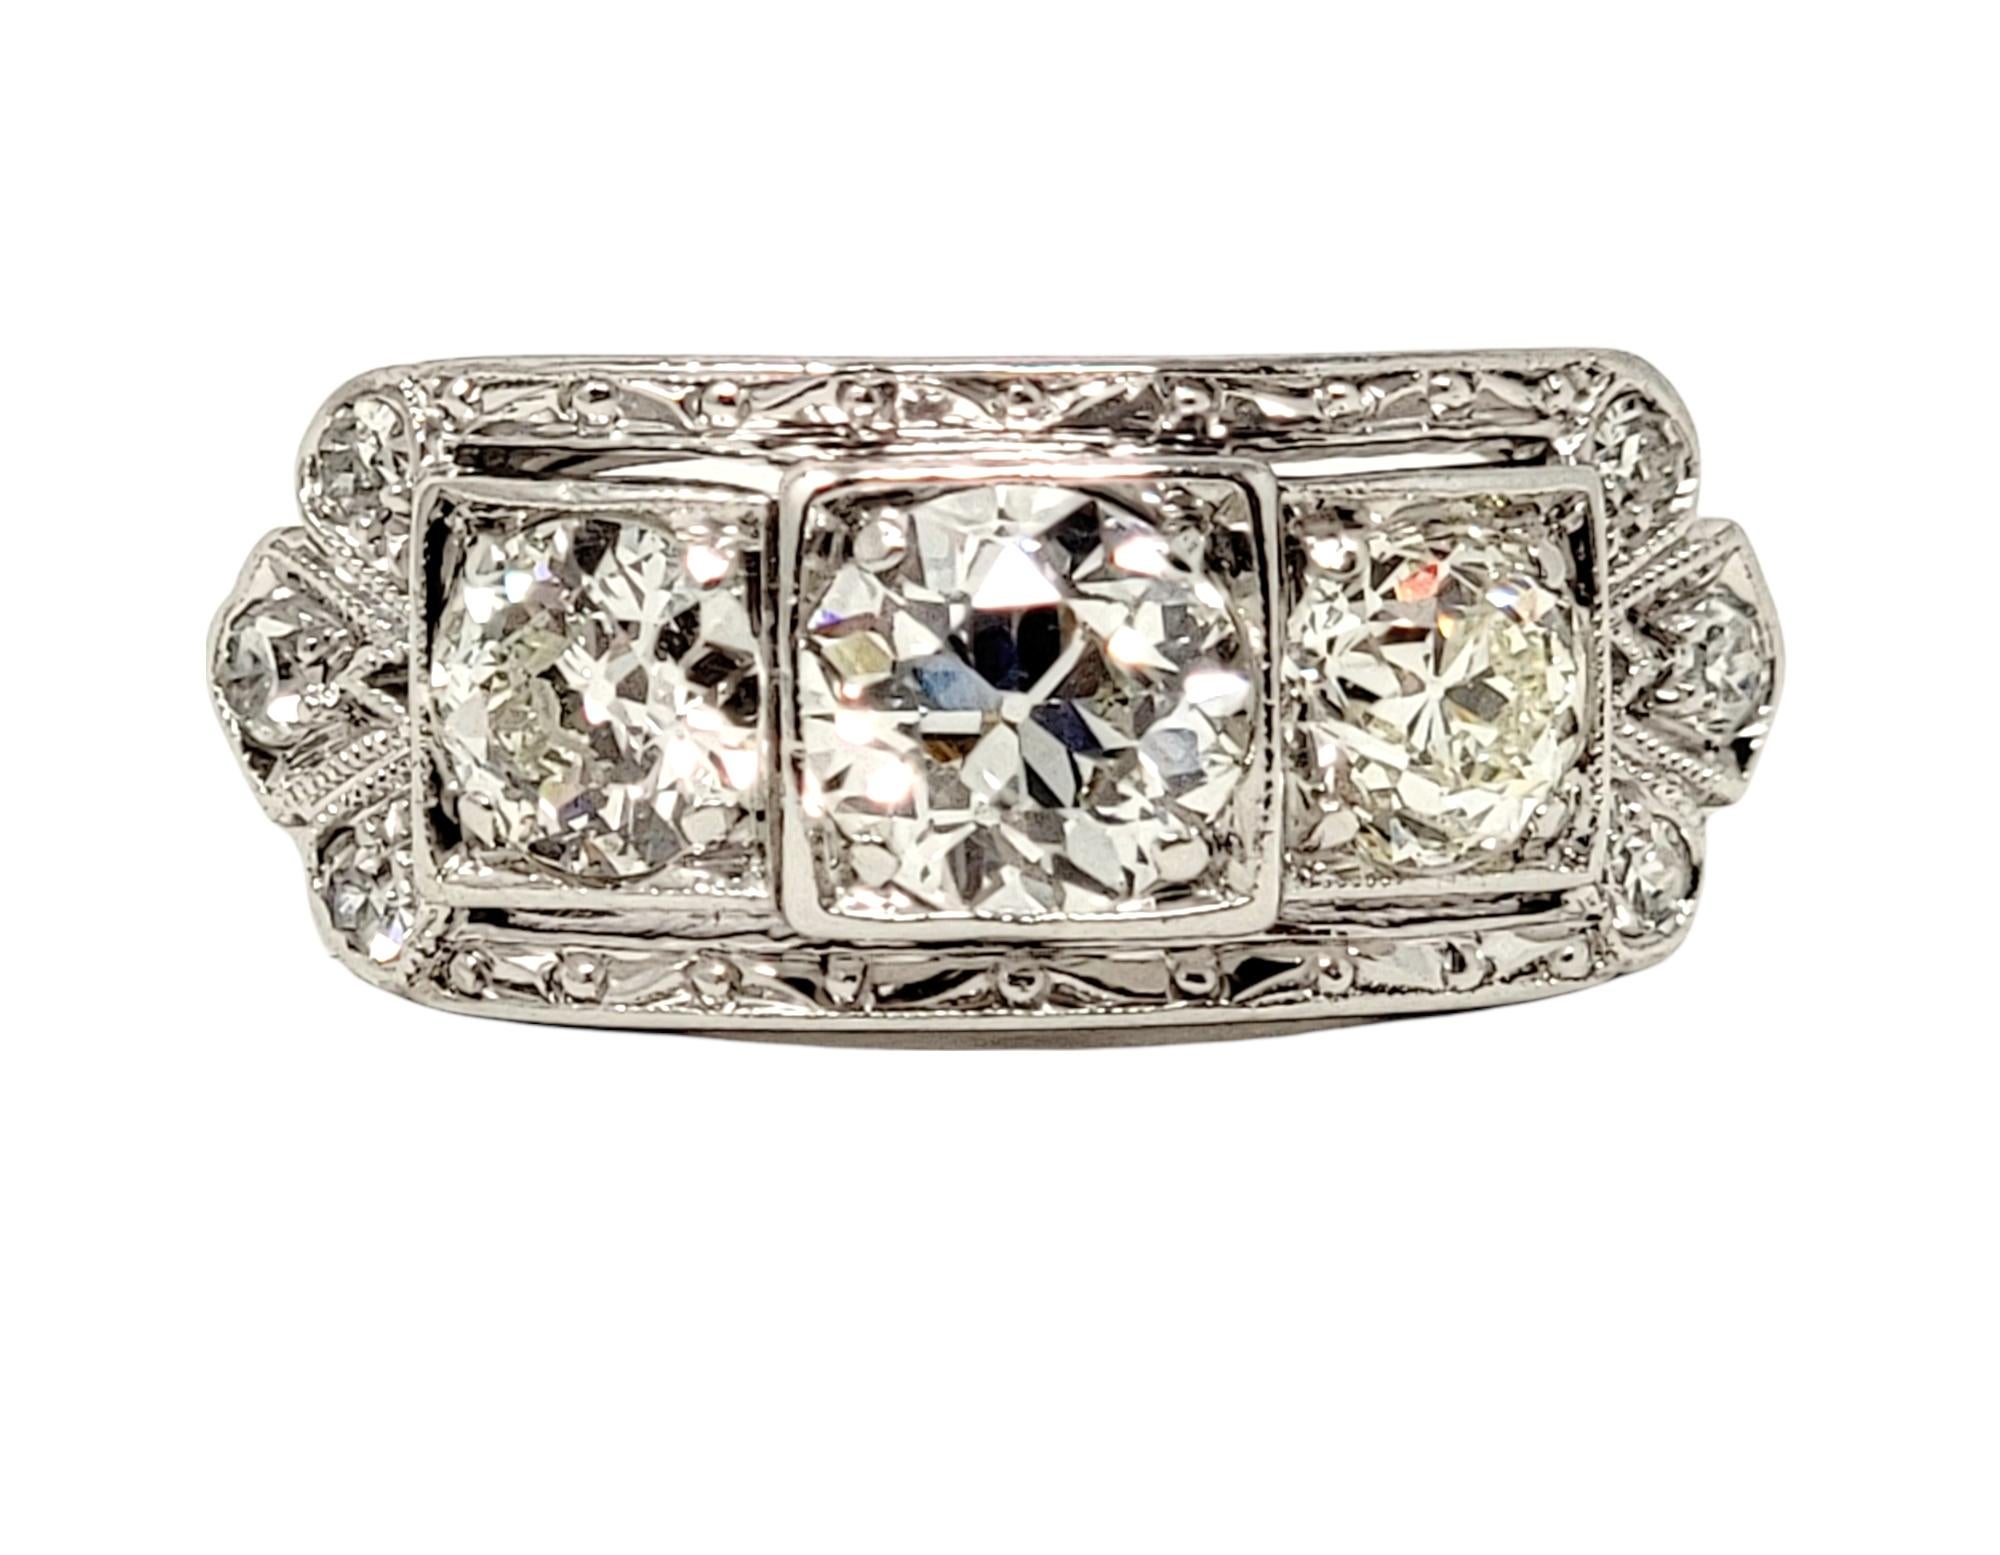 Ring size: 6.25

Stunning vintage diamond engagement ring with incredible Old World charm. This 3 stone platinum beauty features a single prong set  .62 carat Old European cut diamond at the center flanked by 2 slightly smaller round diamonds. The 3